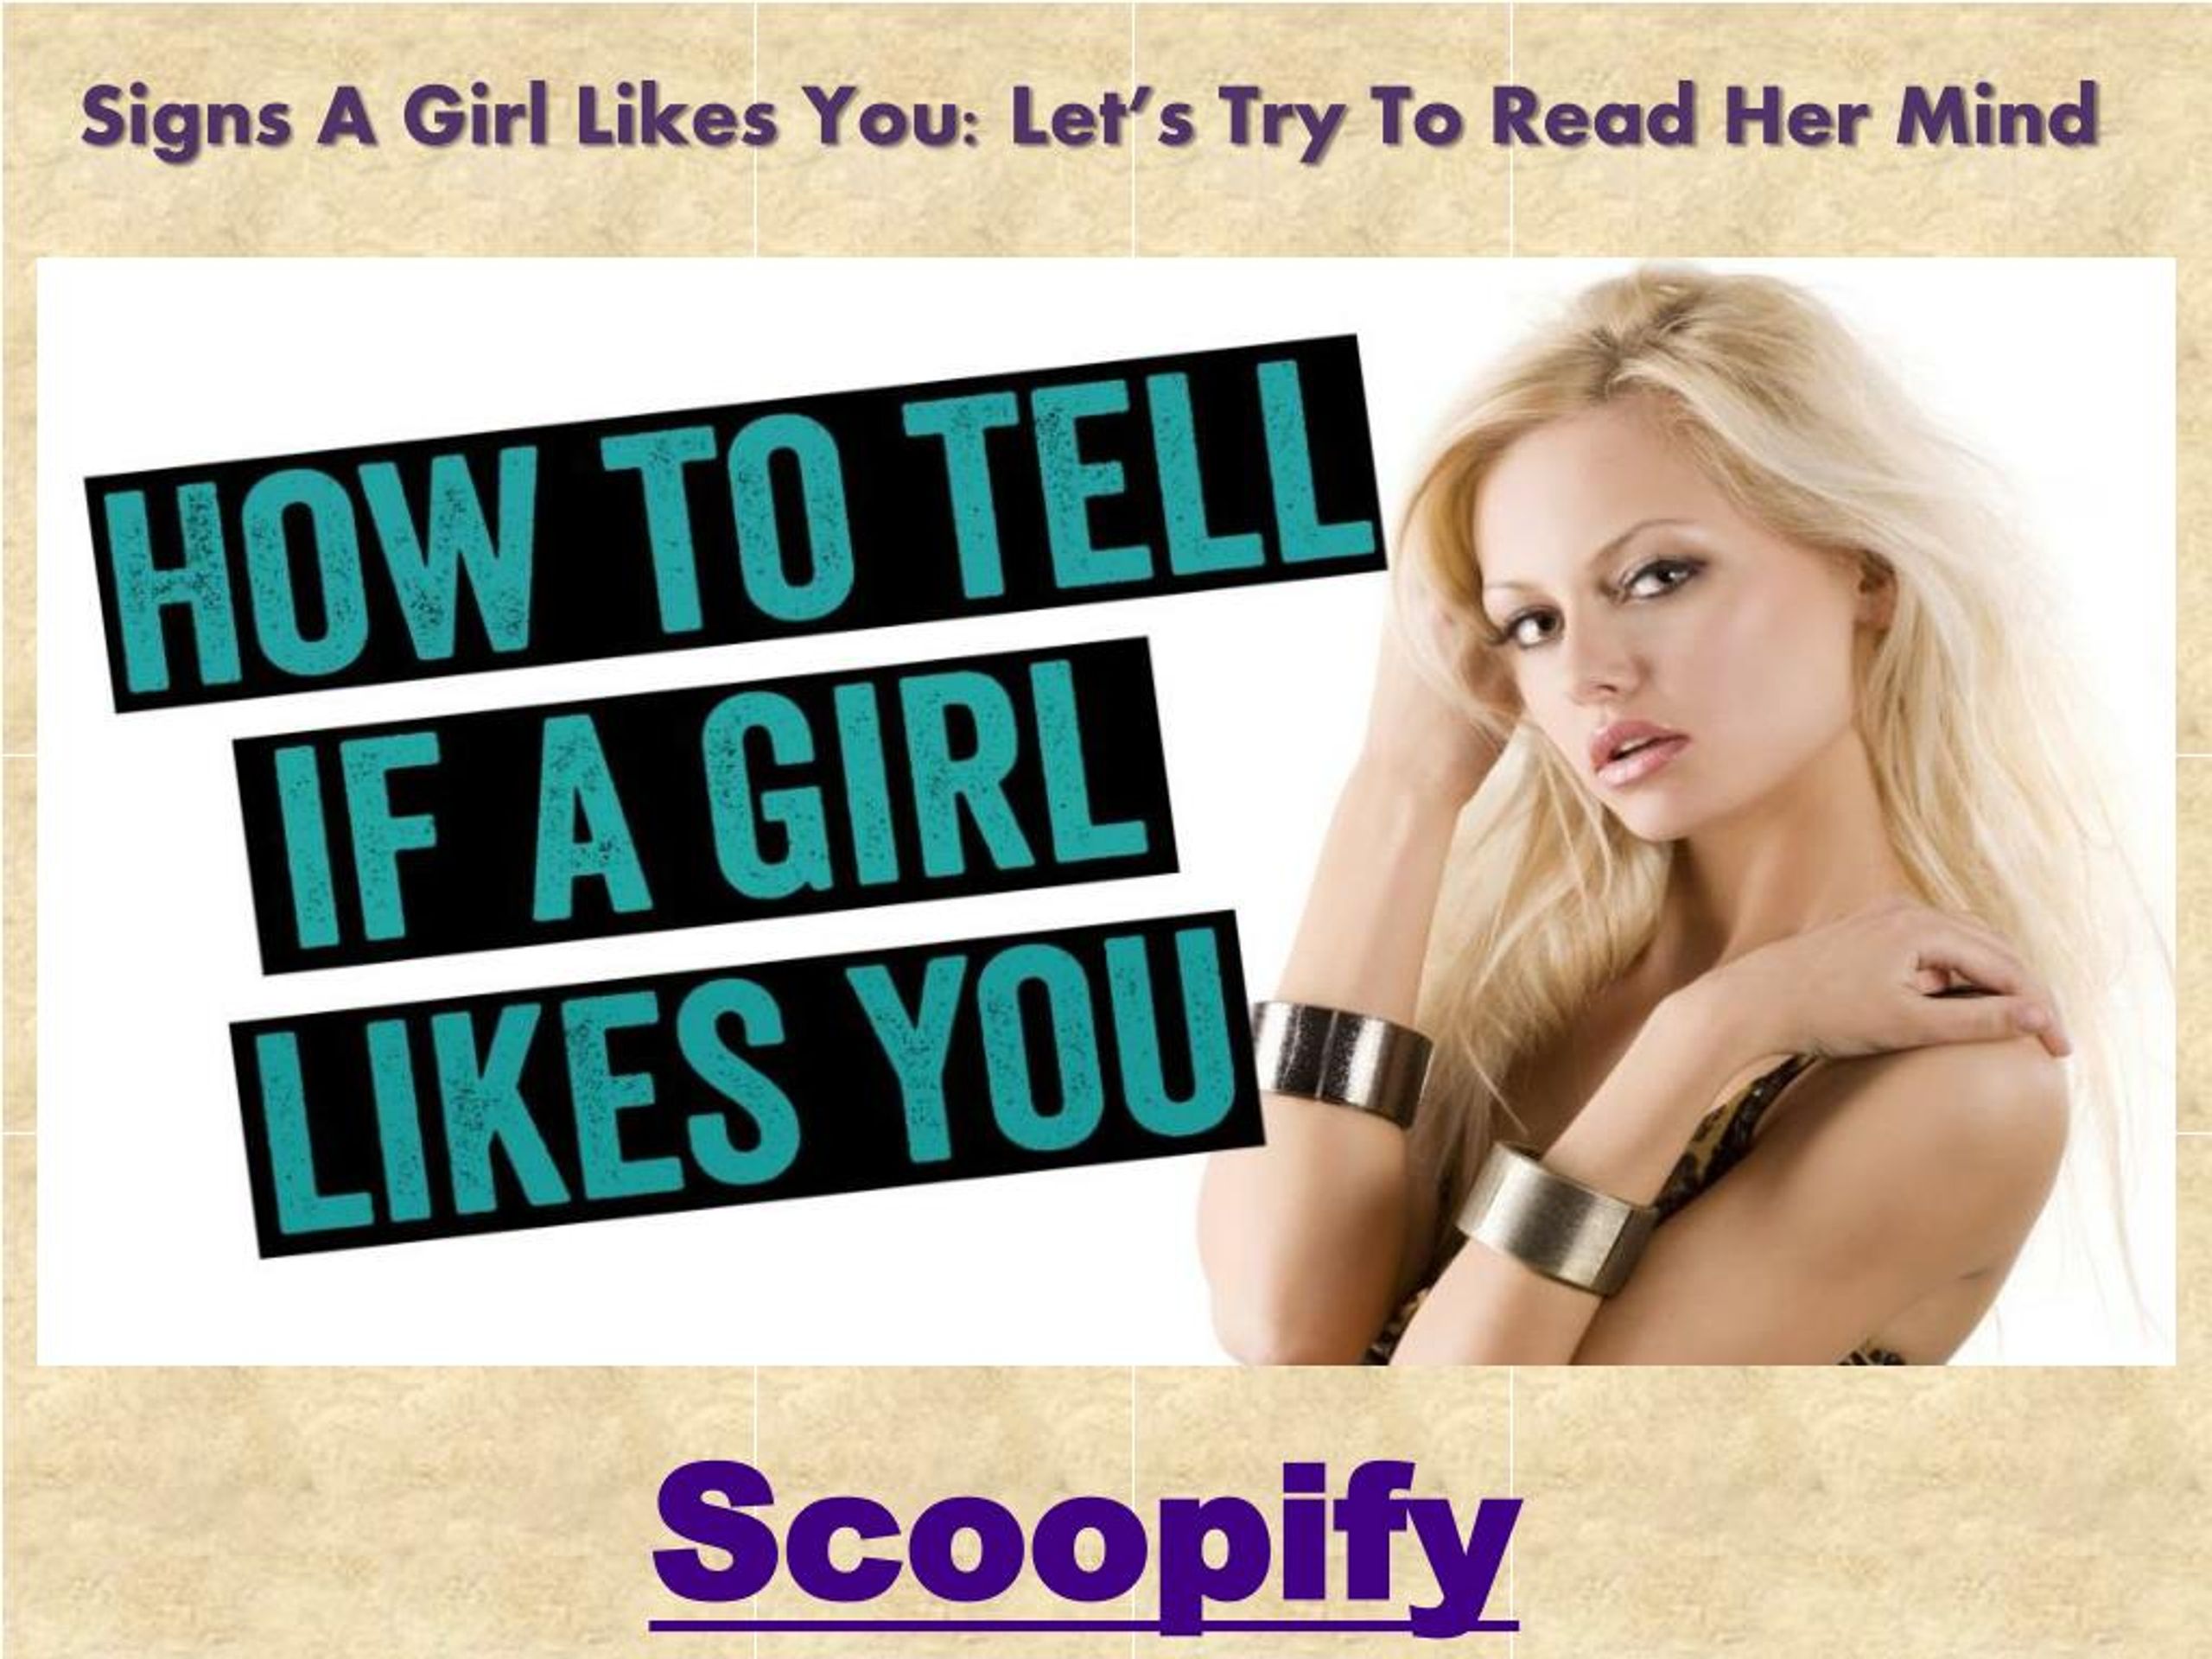 PPT - Signs A Girl Likes You: Let’s Try To Read Her Mind Pow